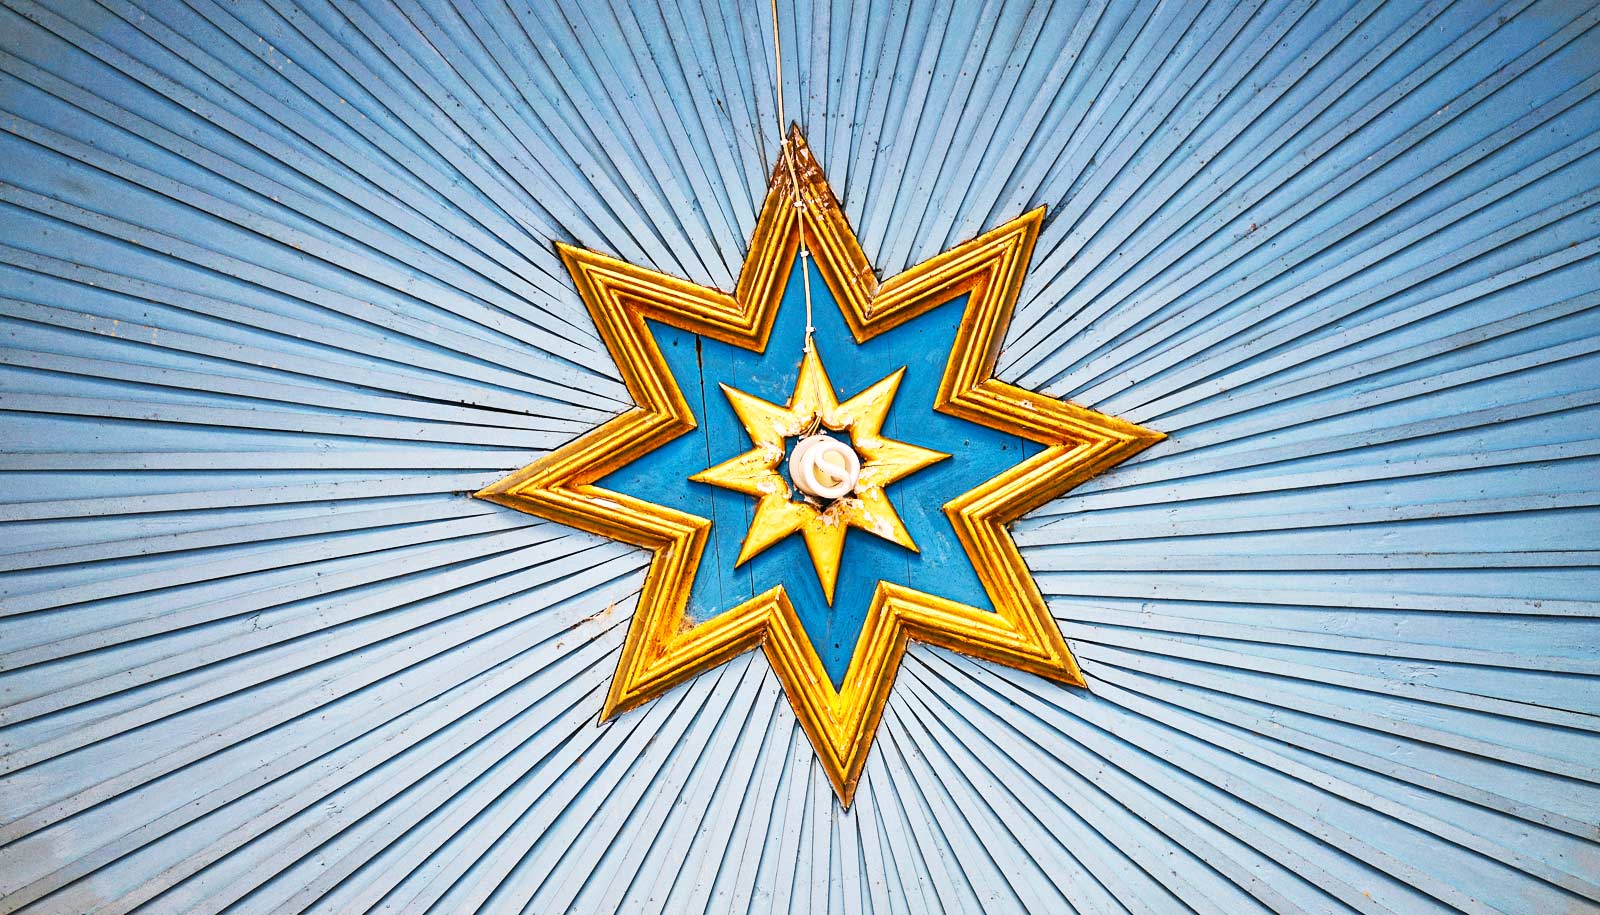 The Masonic Blazing Star is said to be the pinnacle of a Freemason’s journey. In Masonry, a man tries to use knowledge to guide him, much like a star that is blazing against a dark night sky.